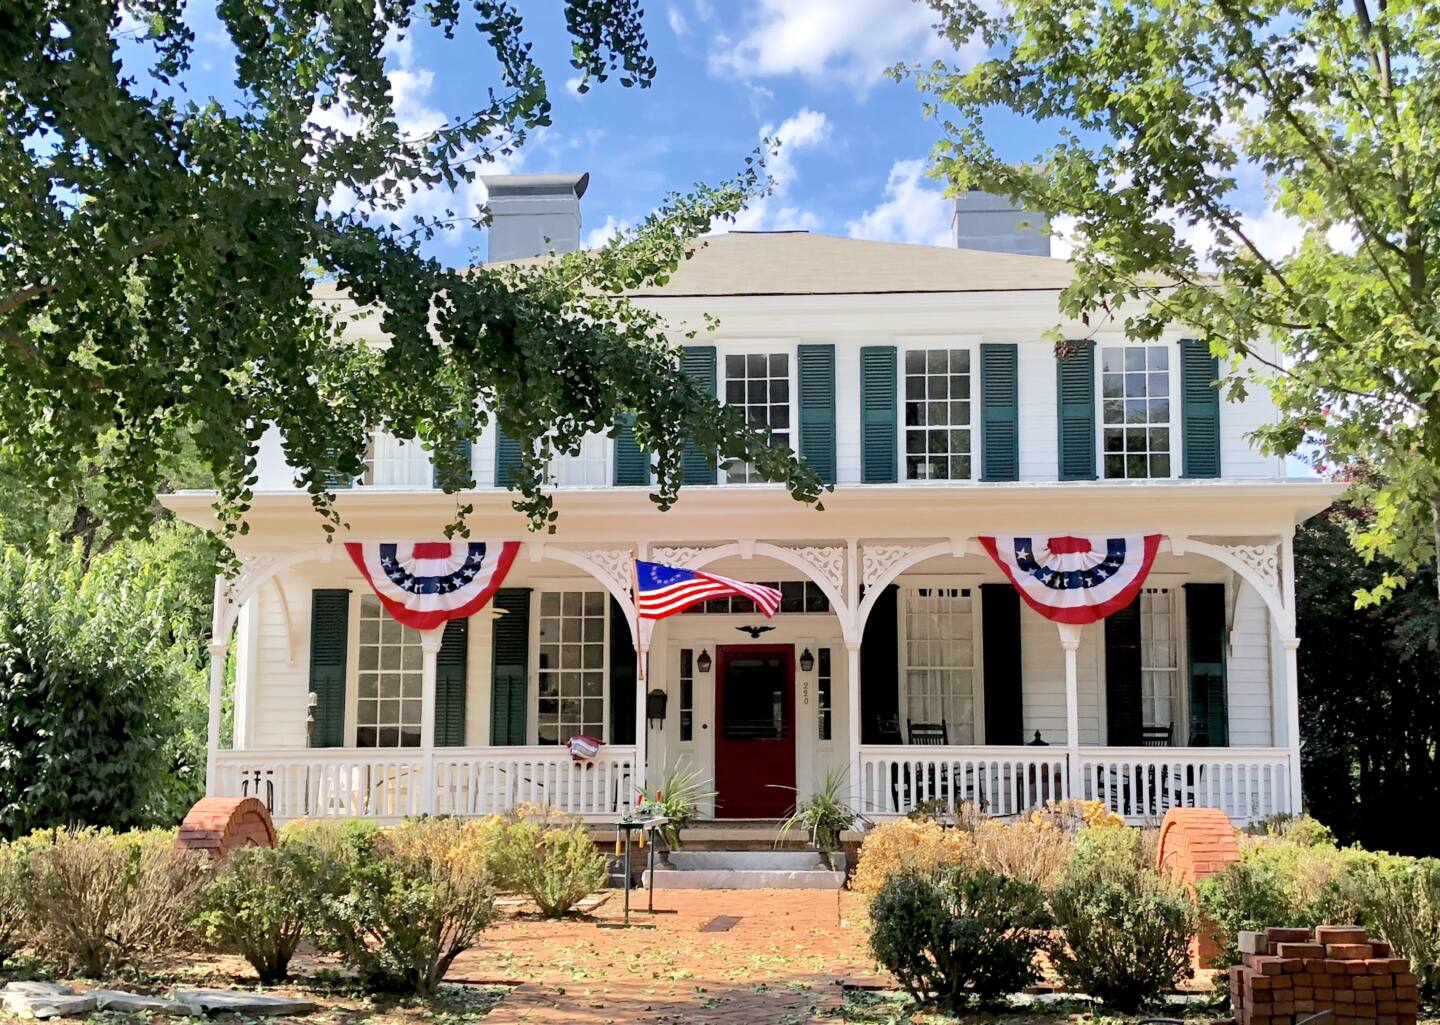 Tour Vince Dooley's House and 50 Other Historic Georgia Homes This Spring